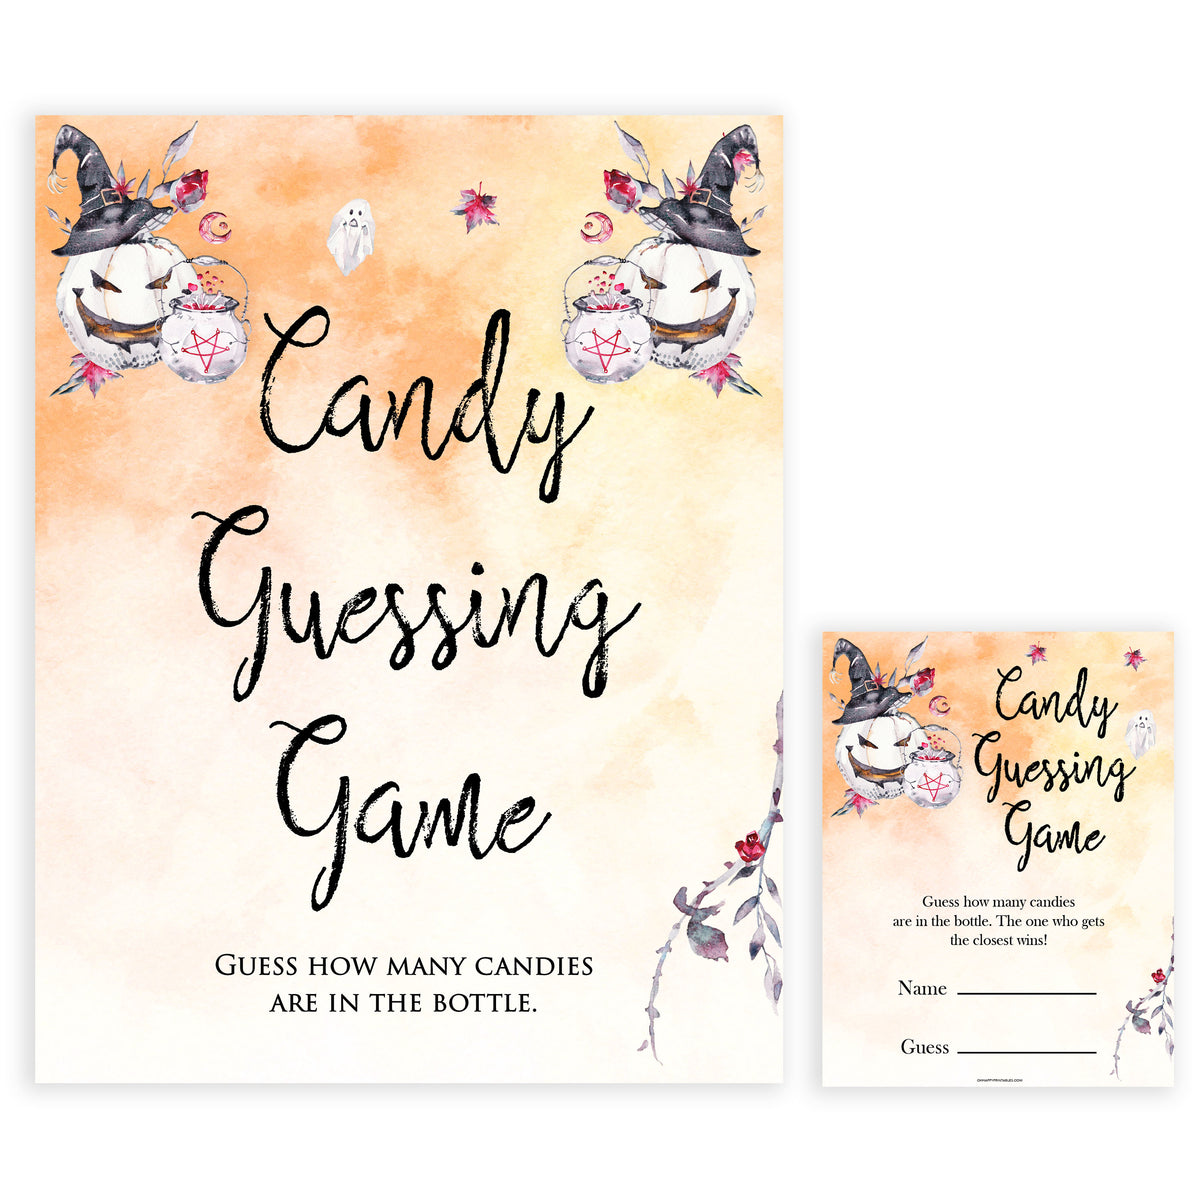 candy-guessing-game-template